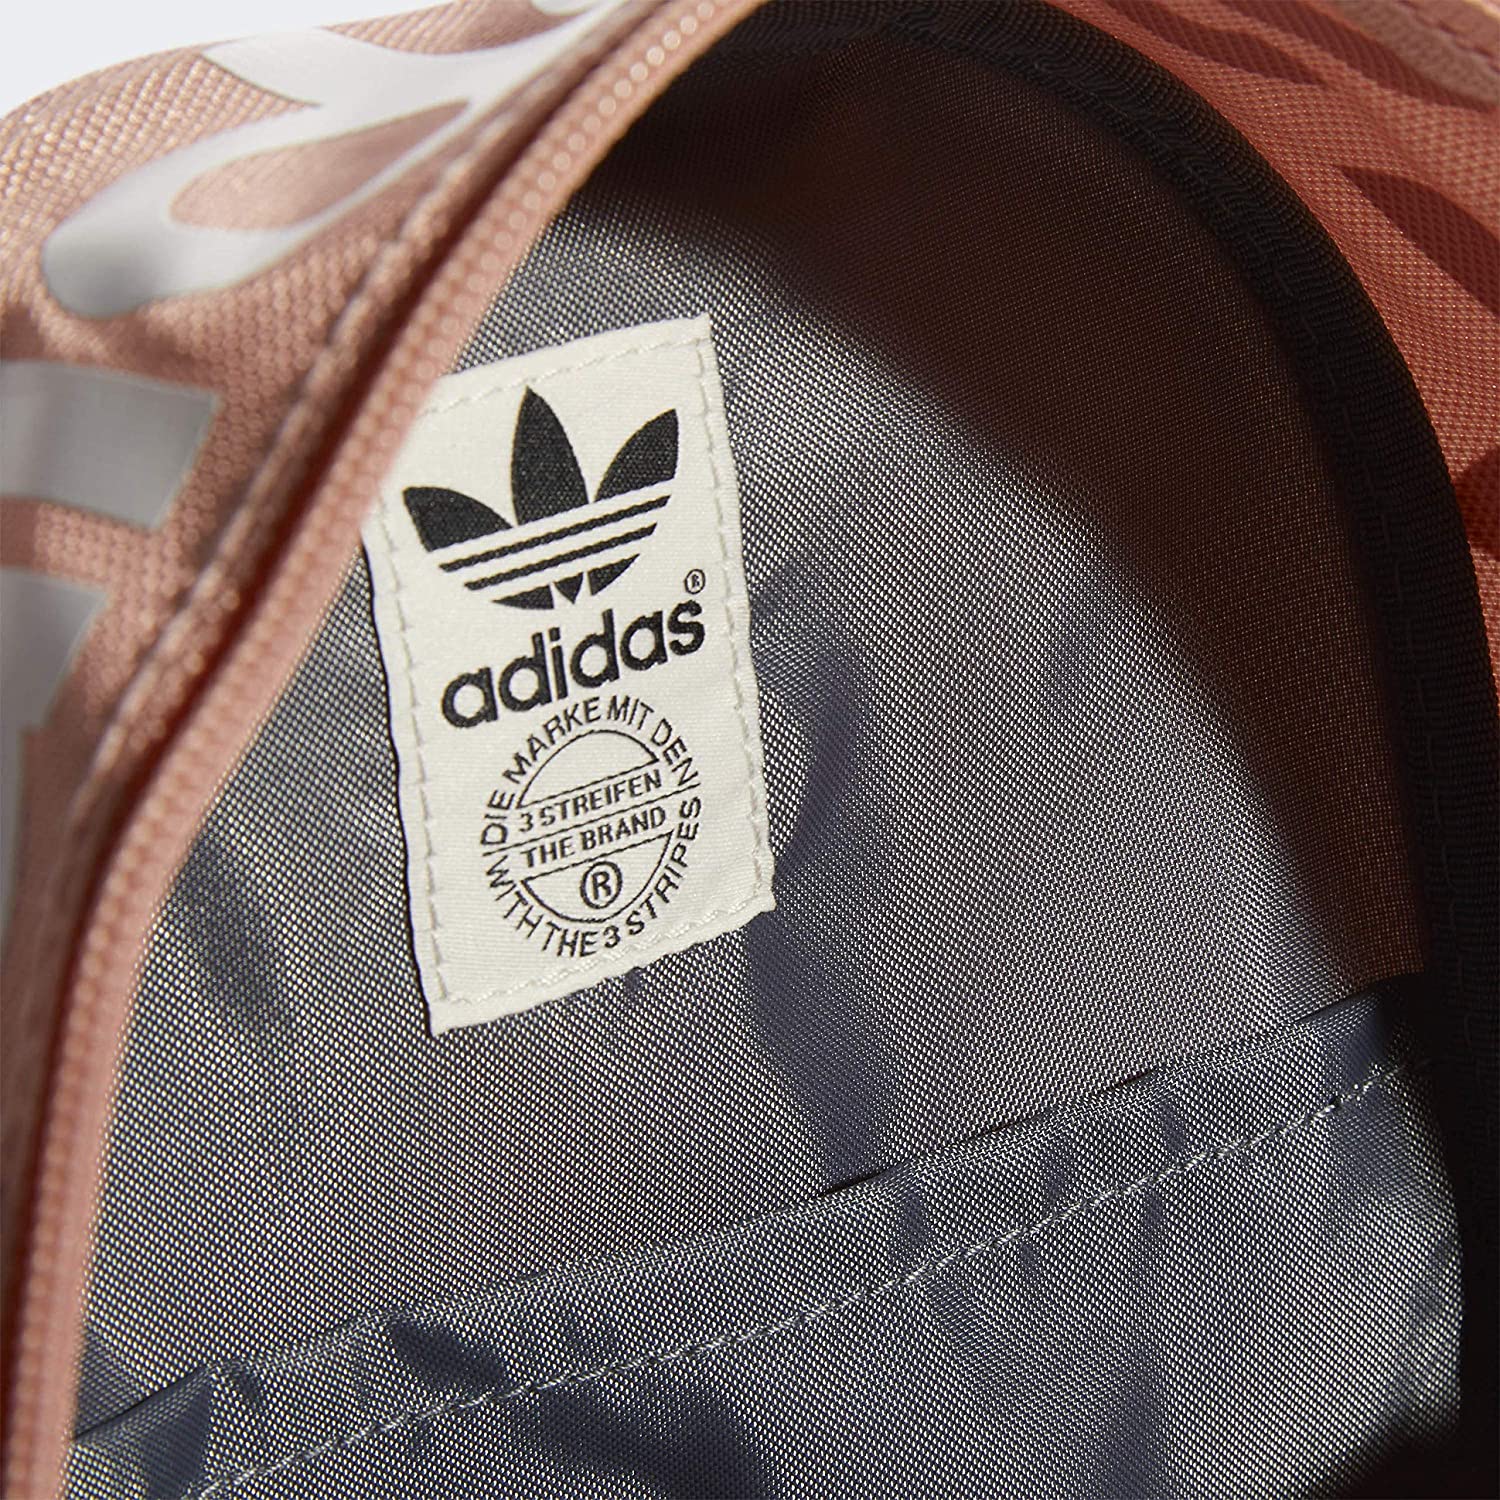 adidas Originals Women's Santiago Mini Backpack, Dust Pink, One Size One Size Dust Pink - image 3 of 7